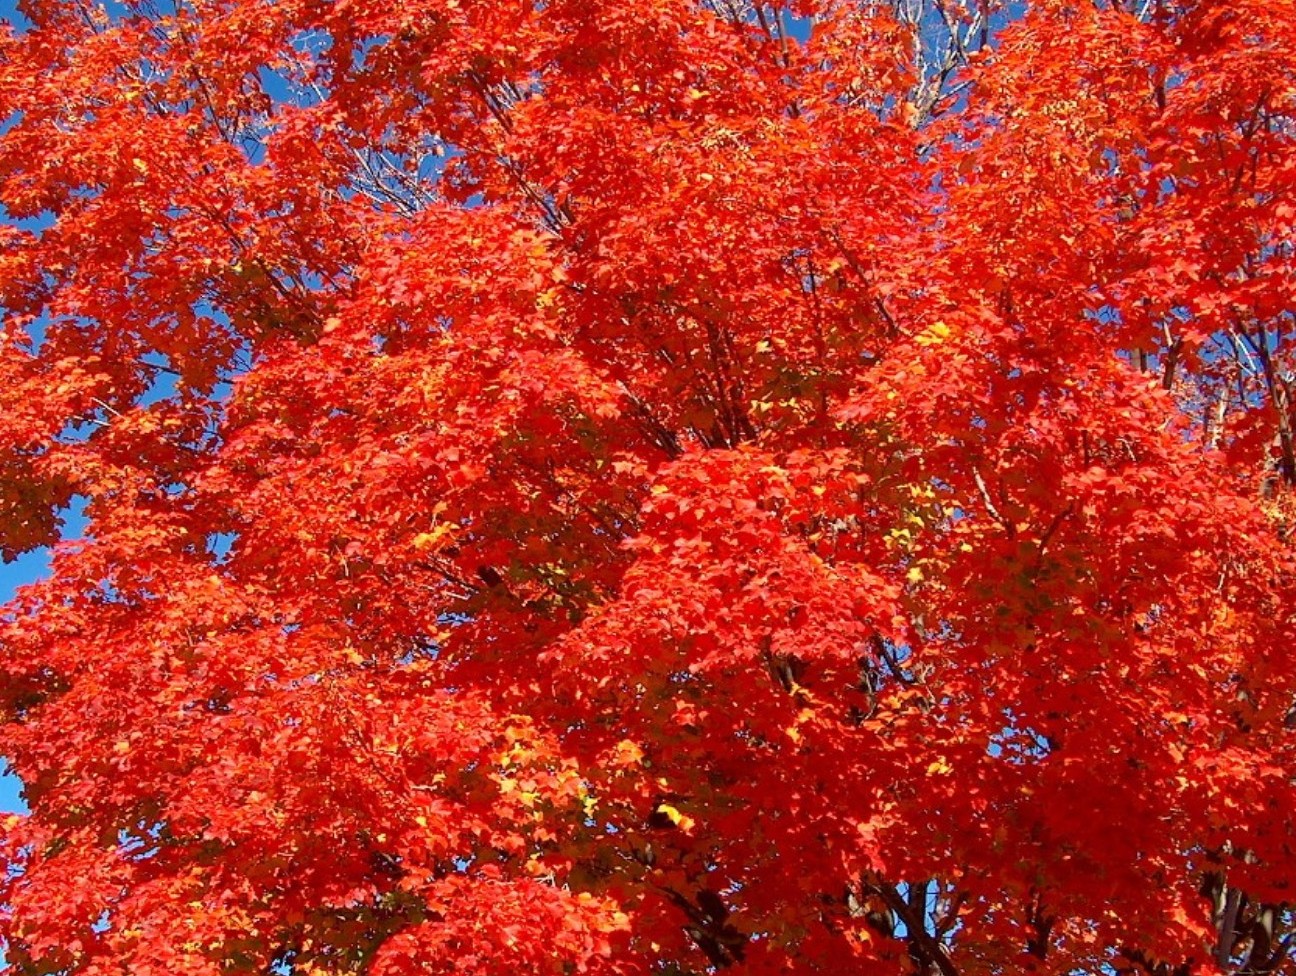 Acer rubrum / Red Maple